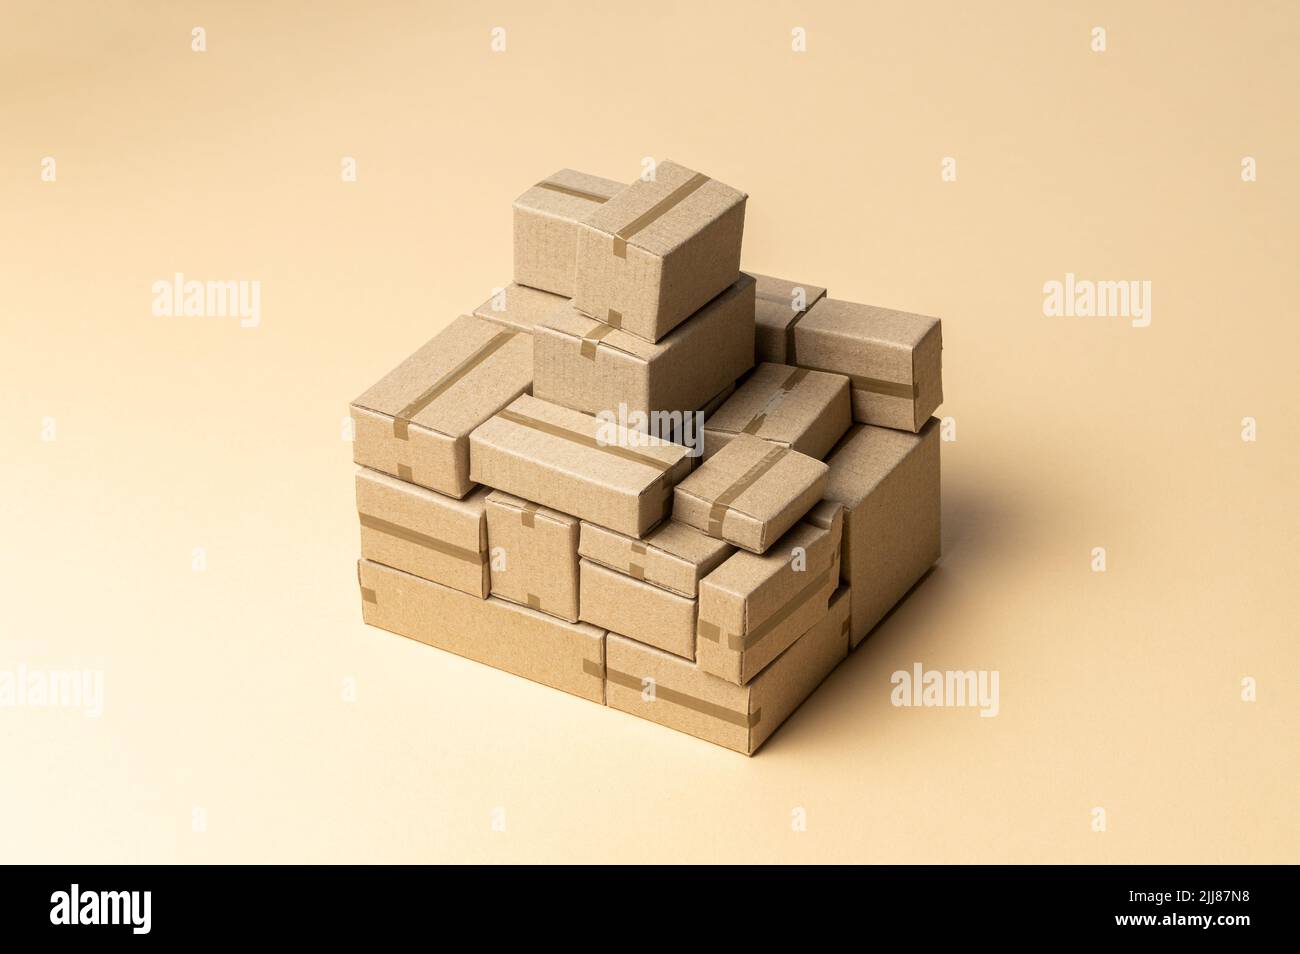 Heap cardboard boxes on a brown background. Stock Photo